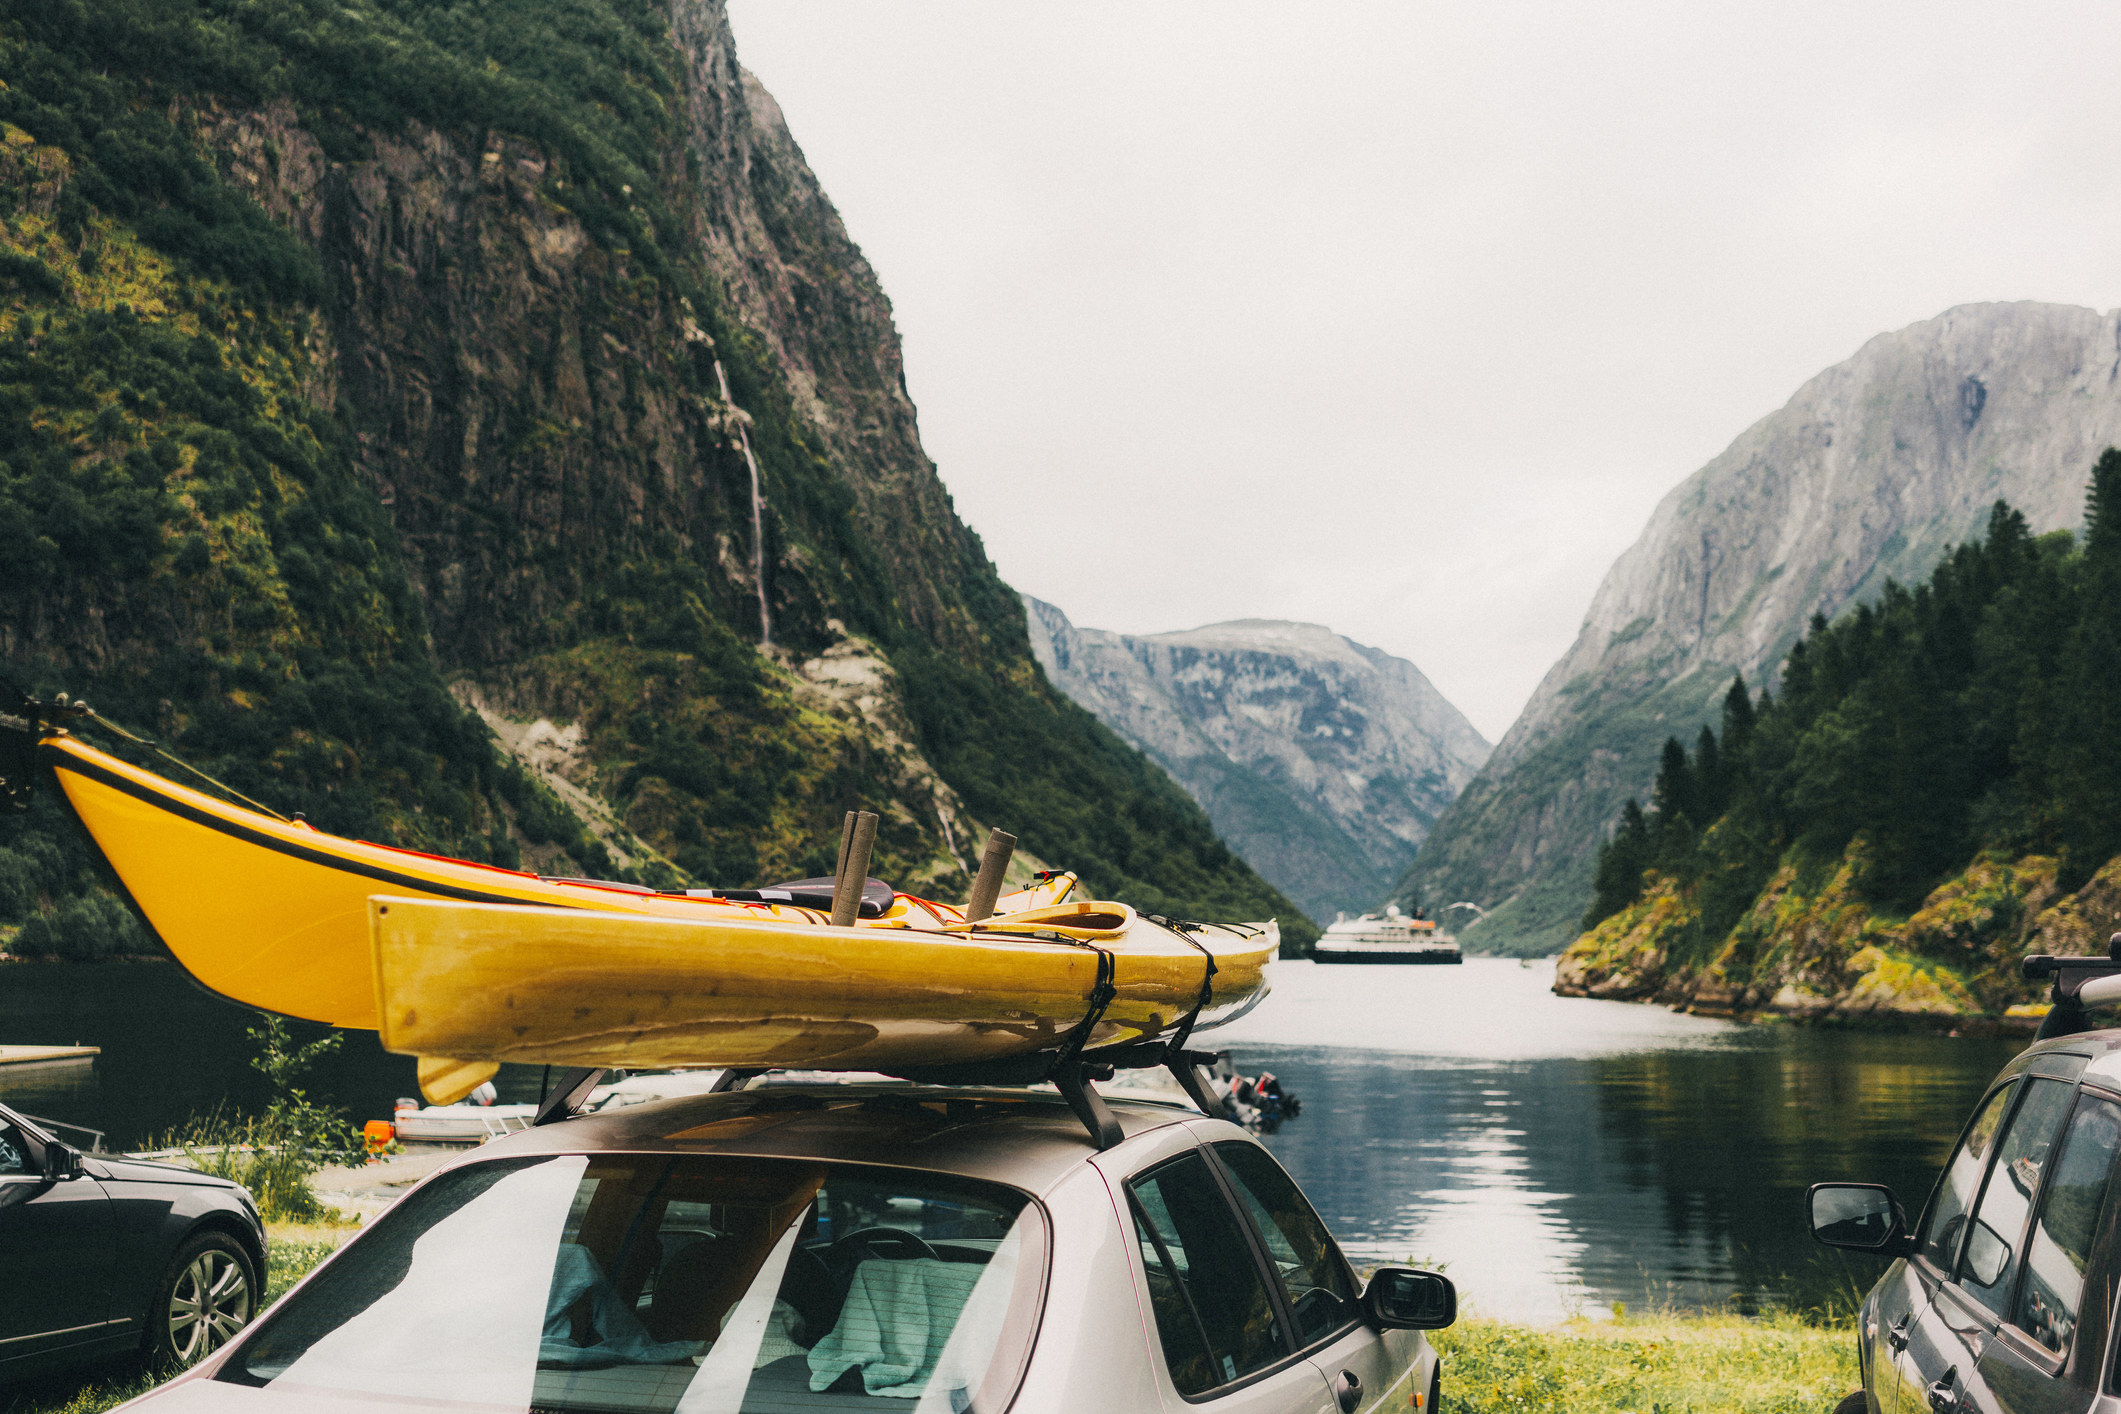 A kayak sits on top of a car overlooking a lake